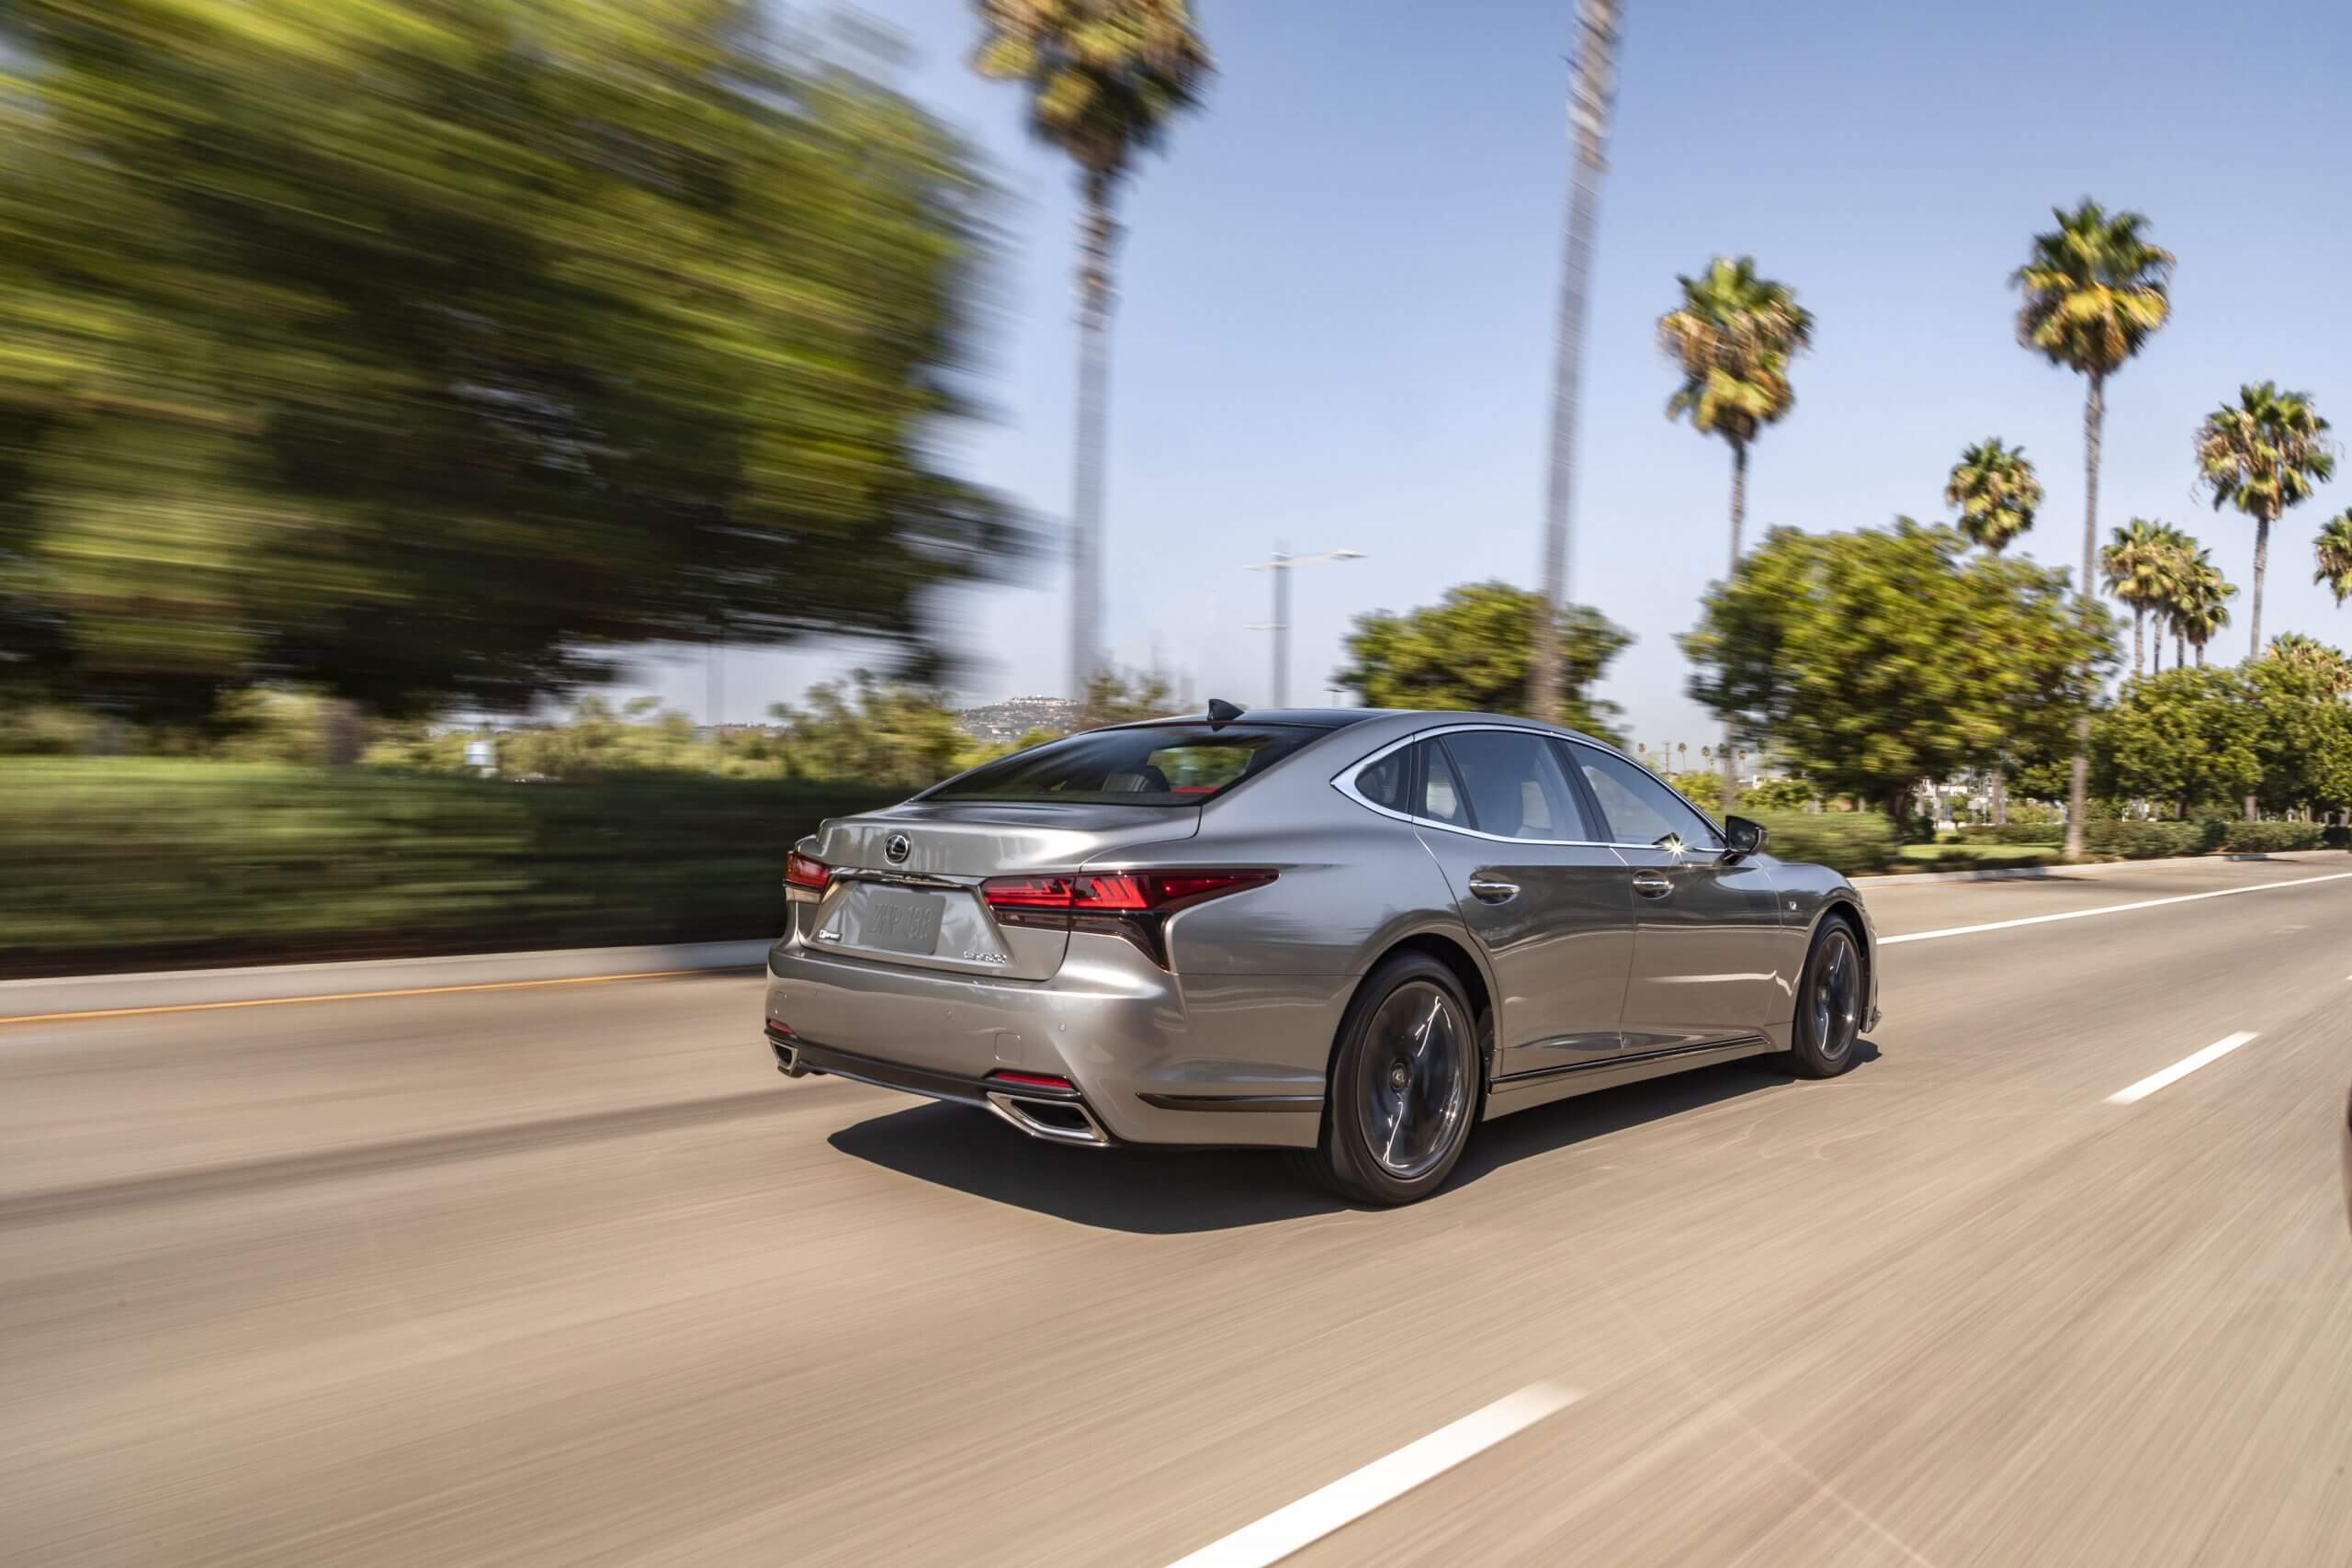 The 2023 Lexus LS speeding down a sunny road with trees.